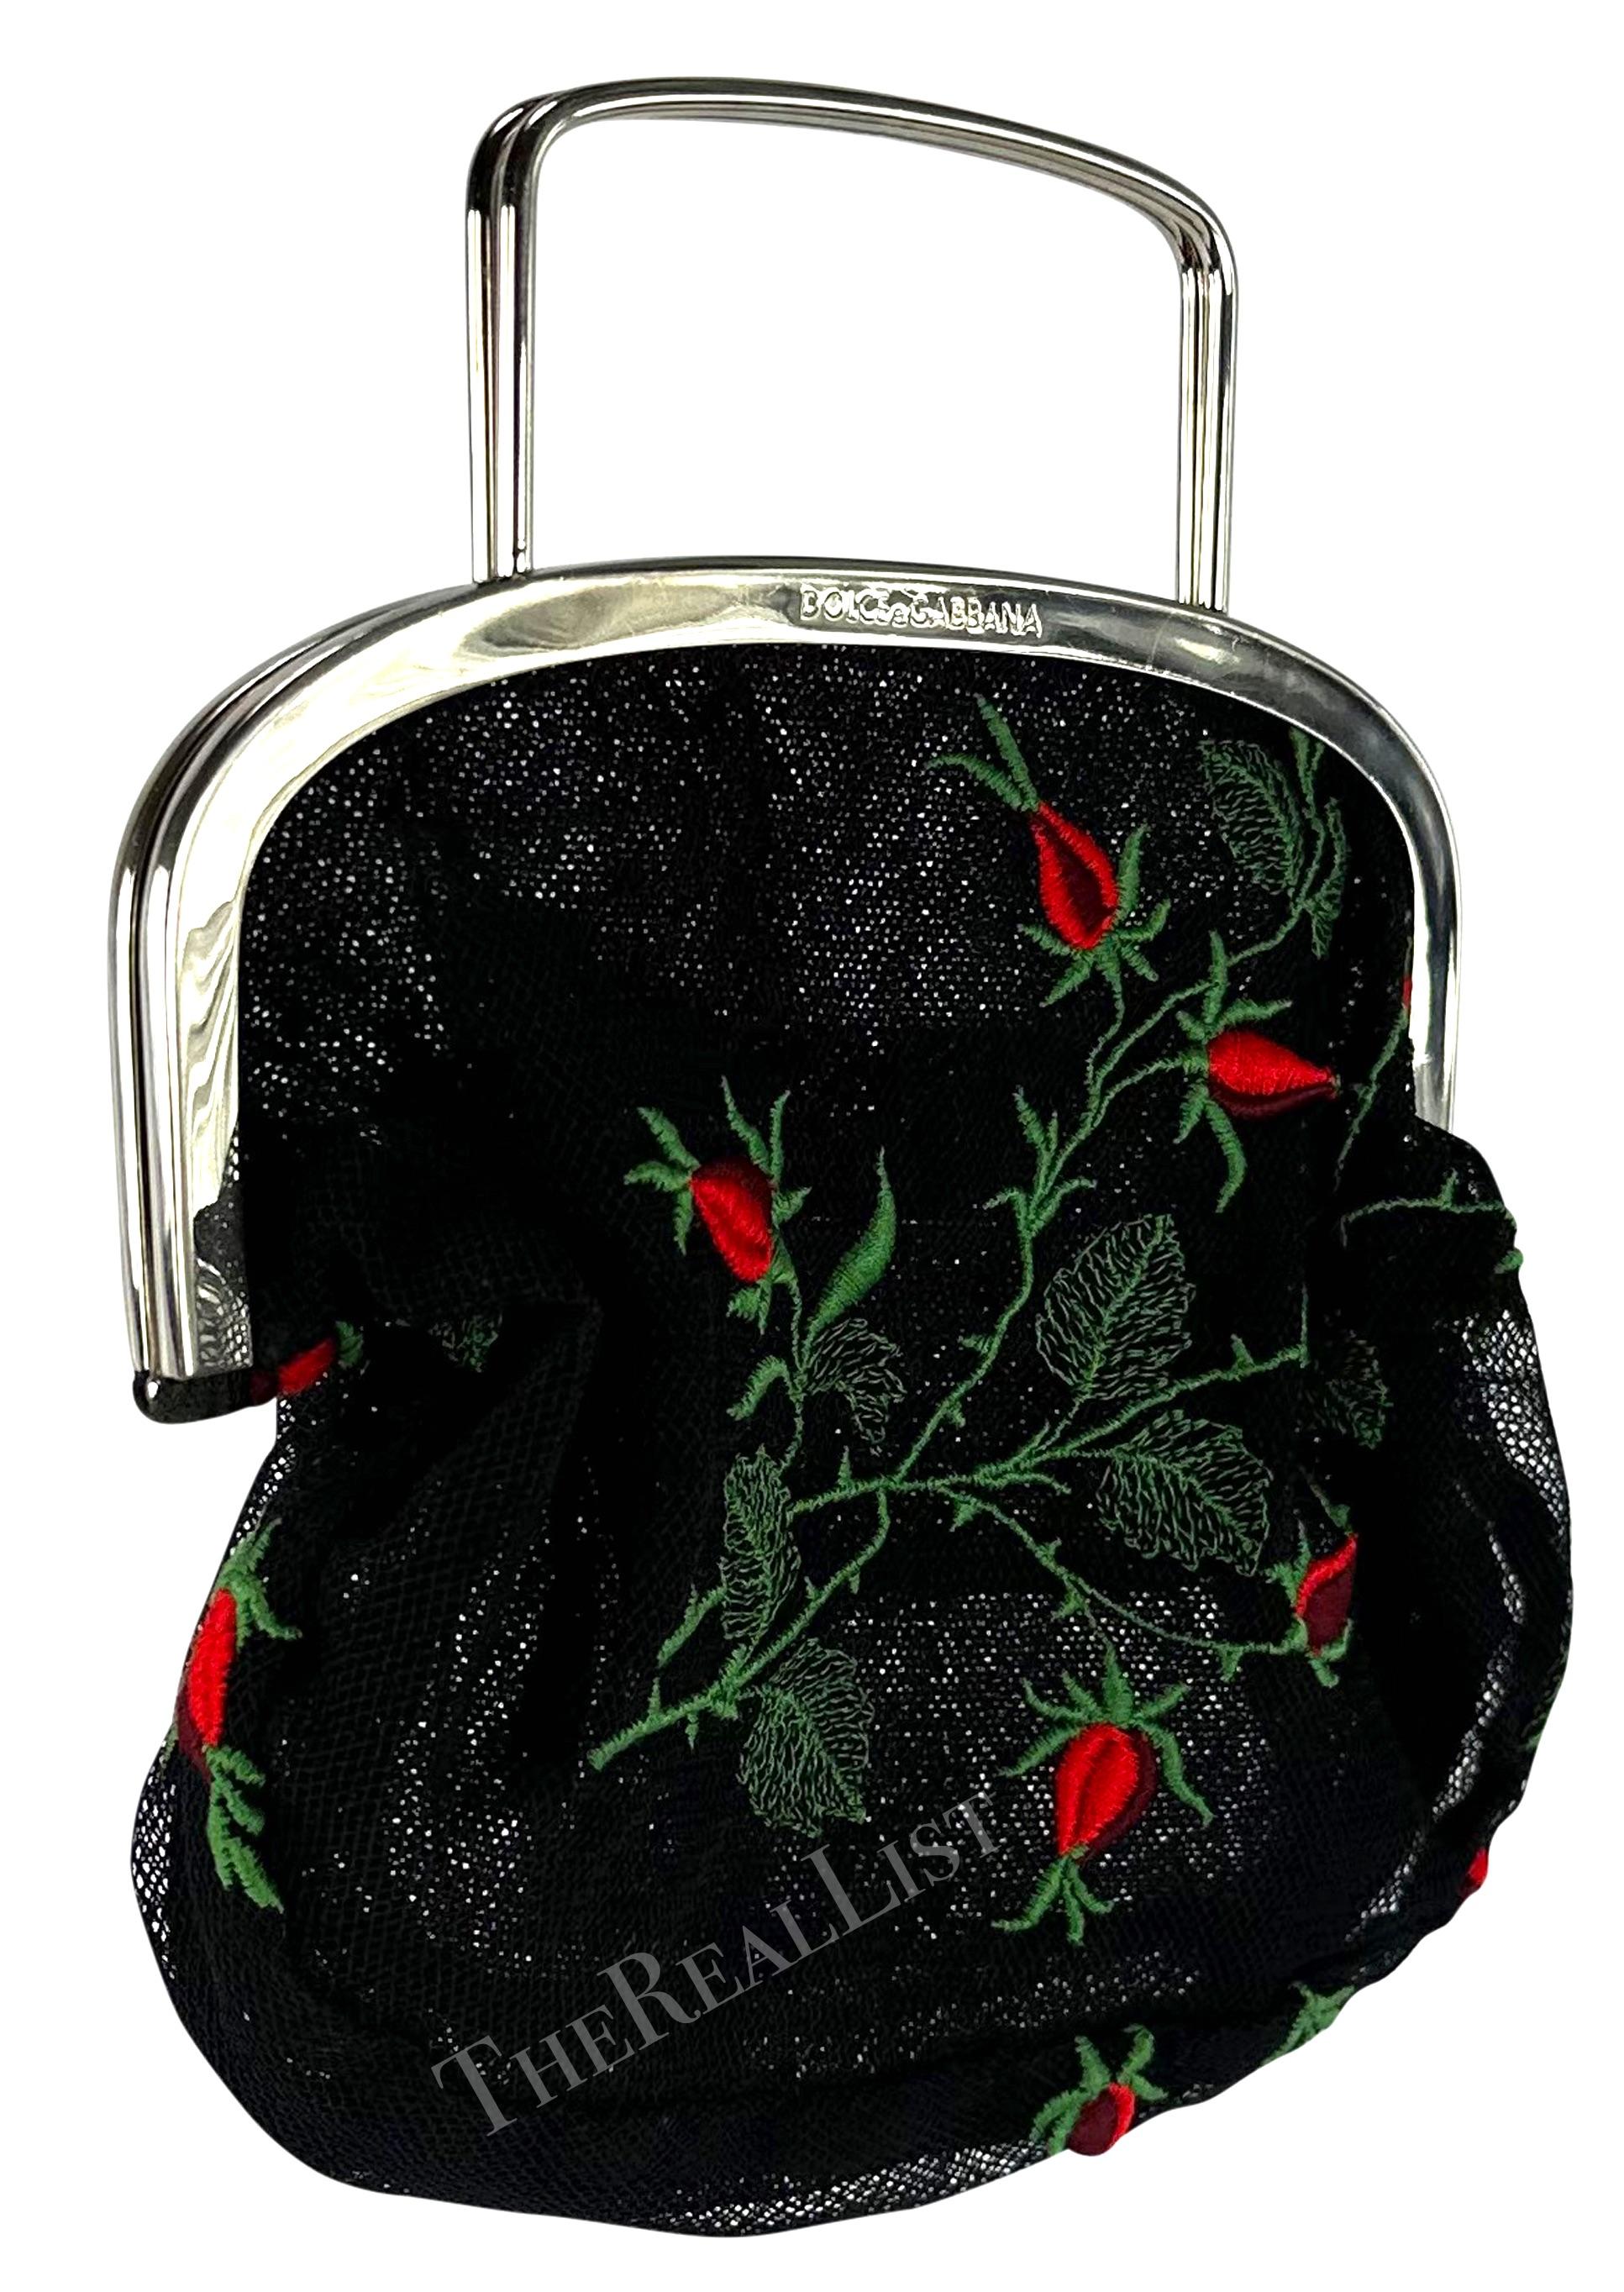 1990s Dolce & Gabbana Black Mesh Red Embroidered Floral Mini Evening Bag For Sale 7